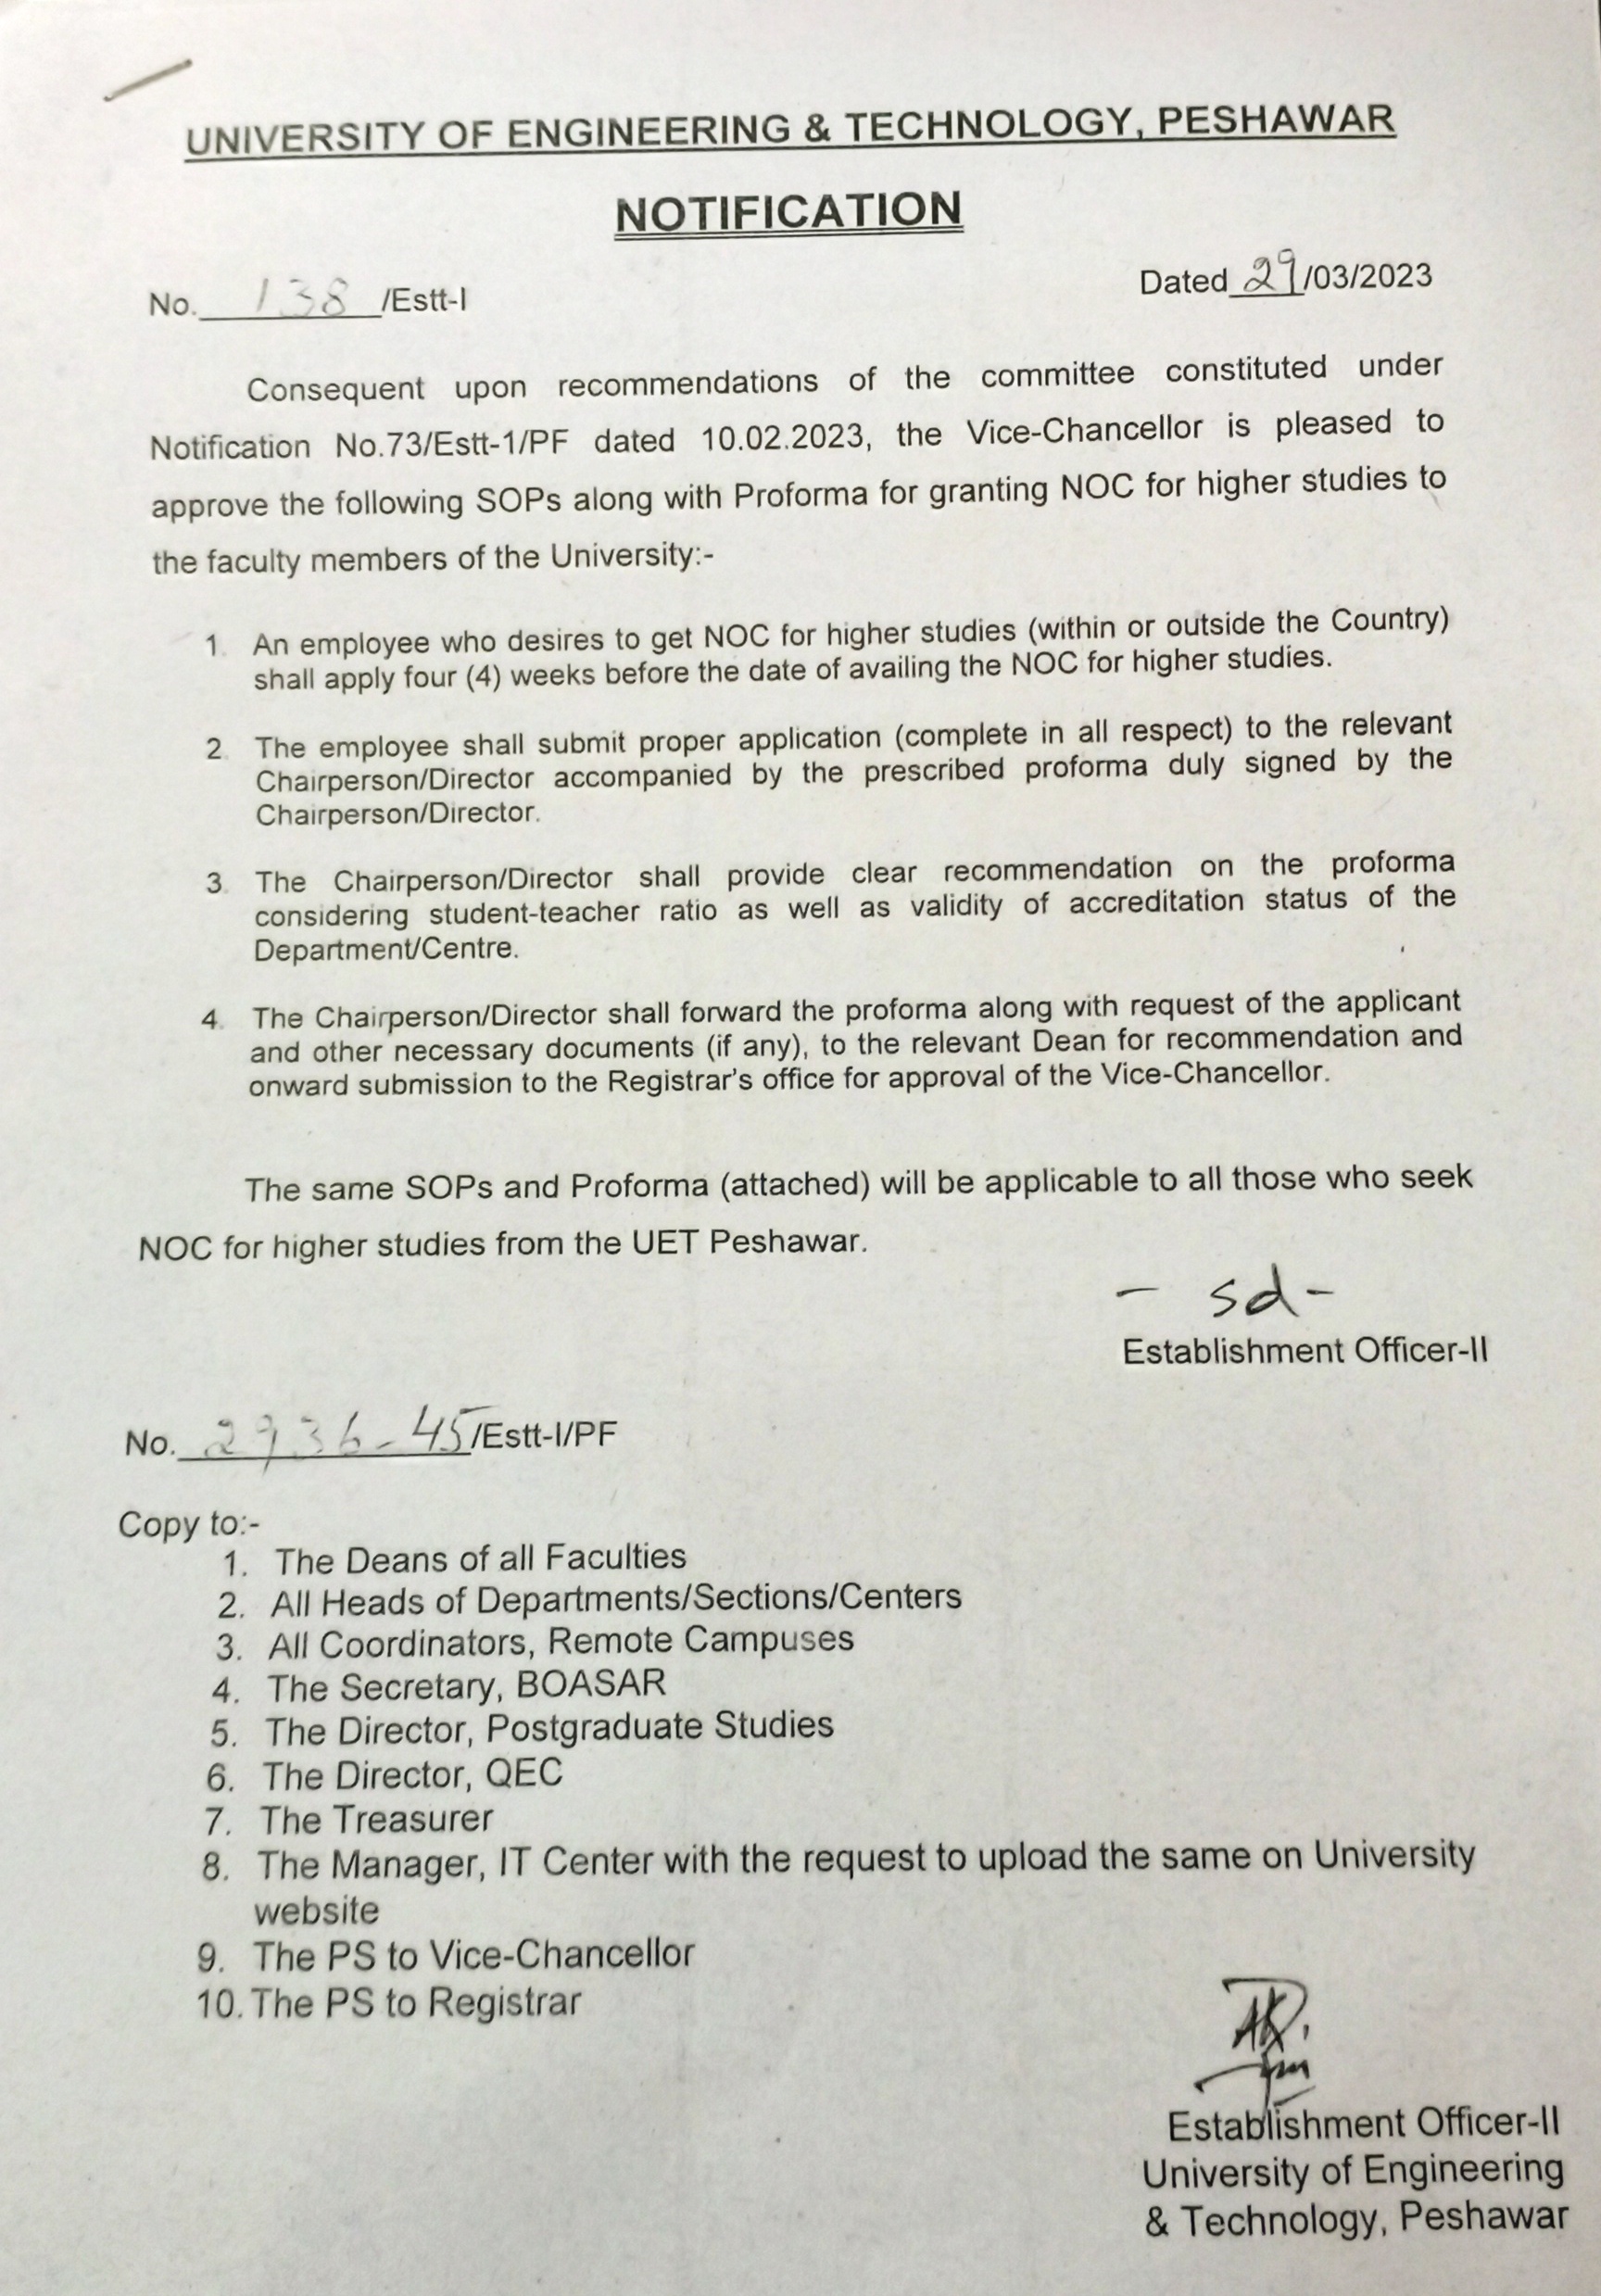 University of Lahore on X: 17. In continuation of point 8 above please  find our official notification on the semester freeze. #DigitalPakistan  16/x  / X